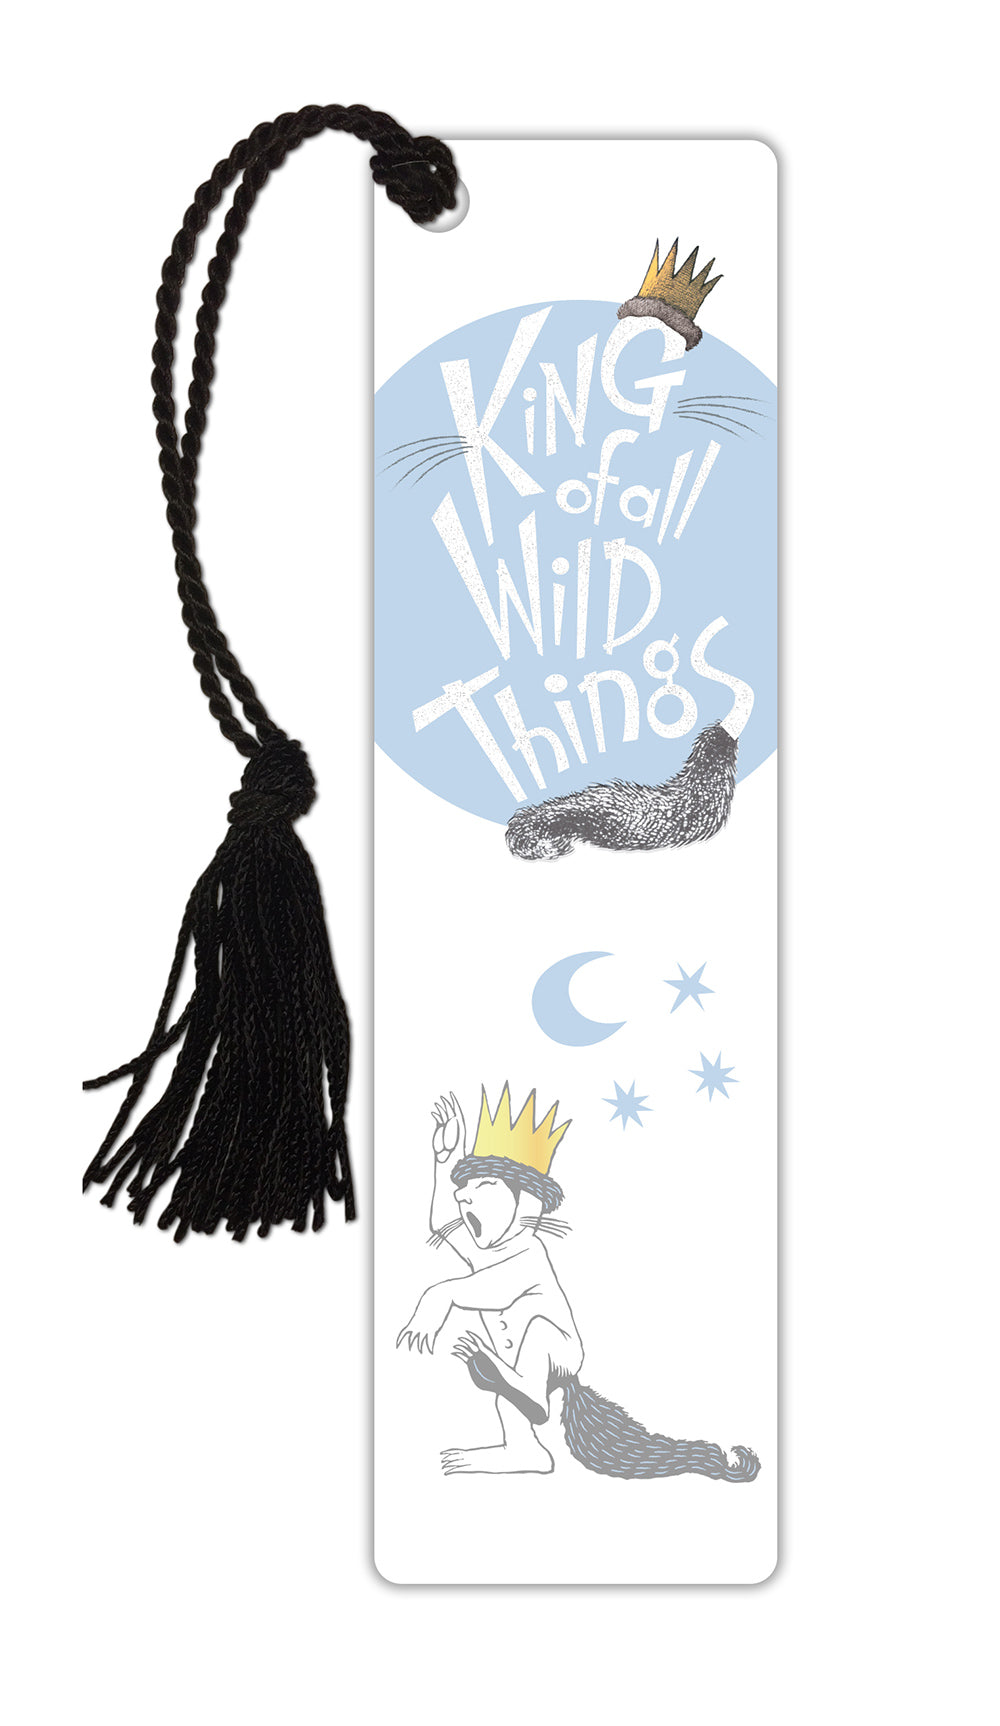 Where the Wild Things Are (King of Wild Things) Bookmark USBMP1000